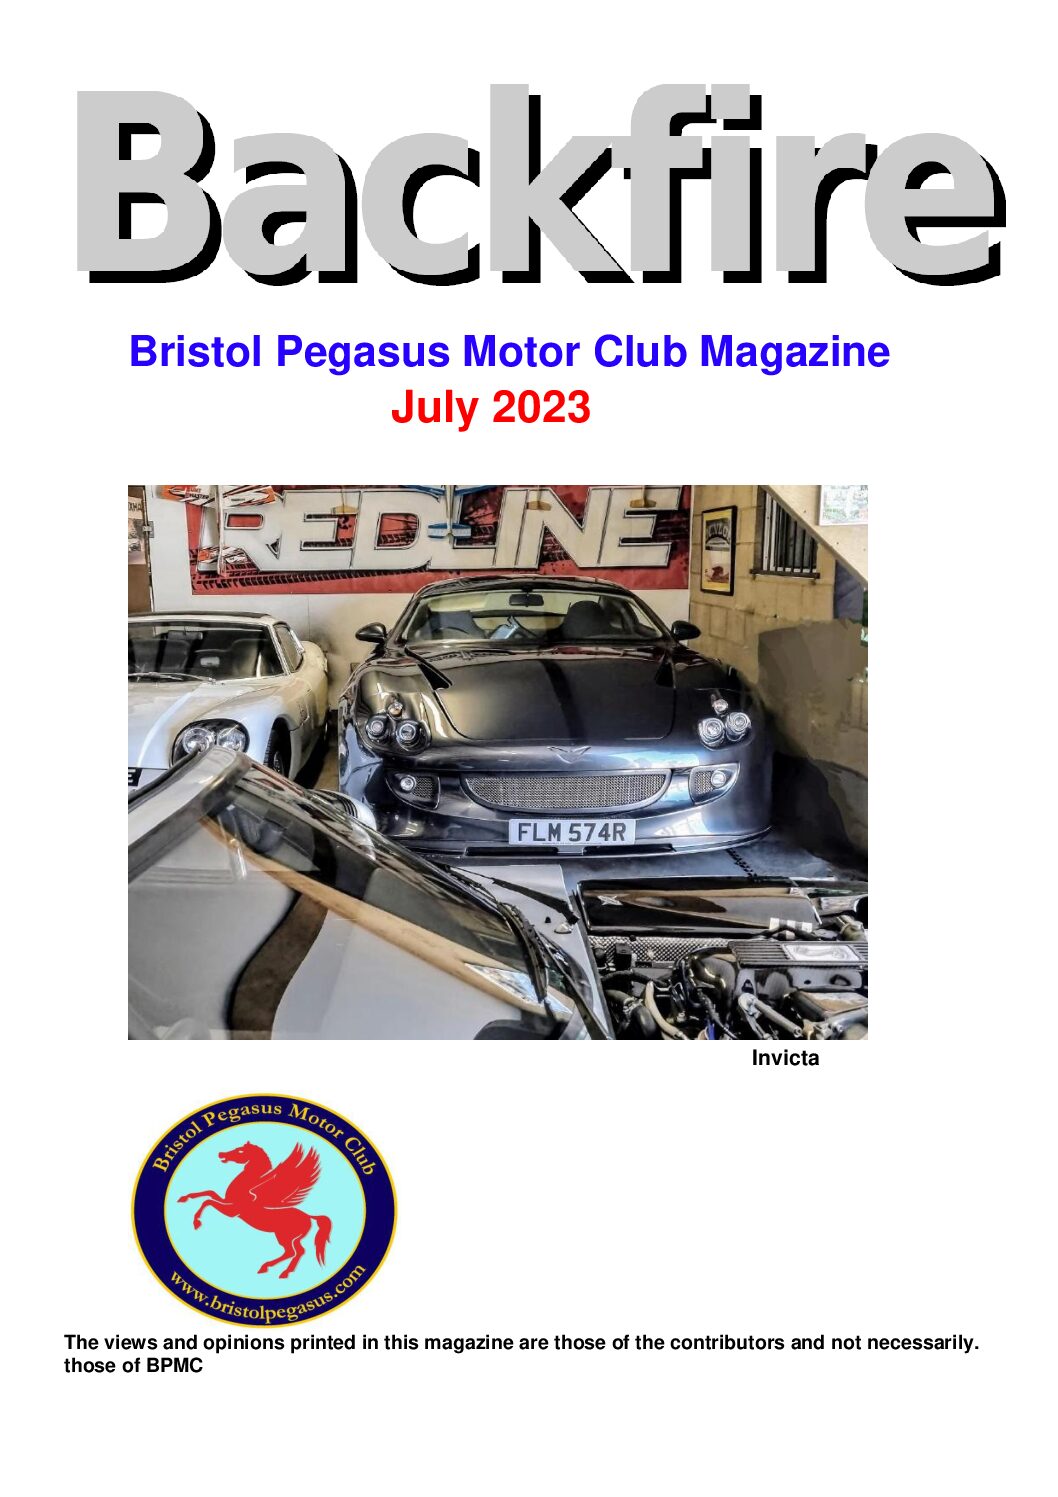 Front cover of July 2023 Issue